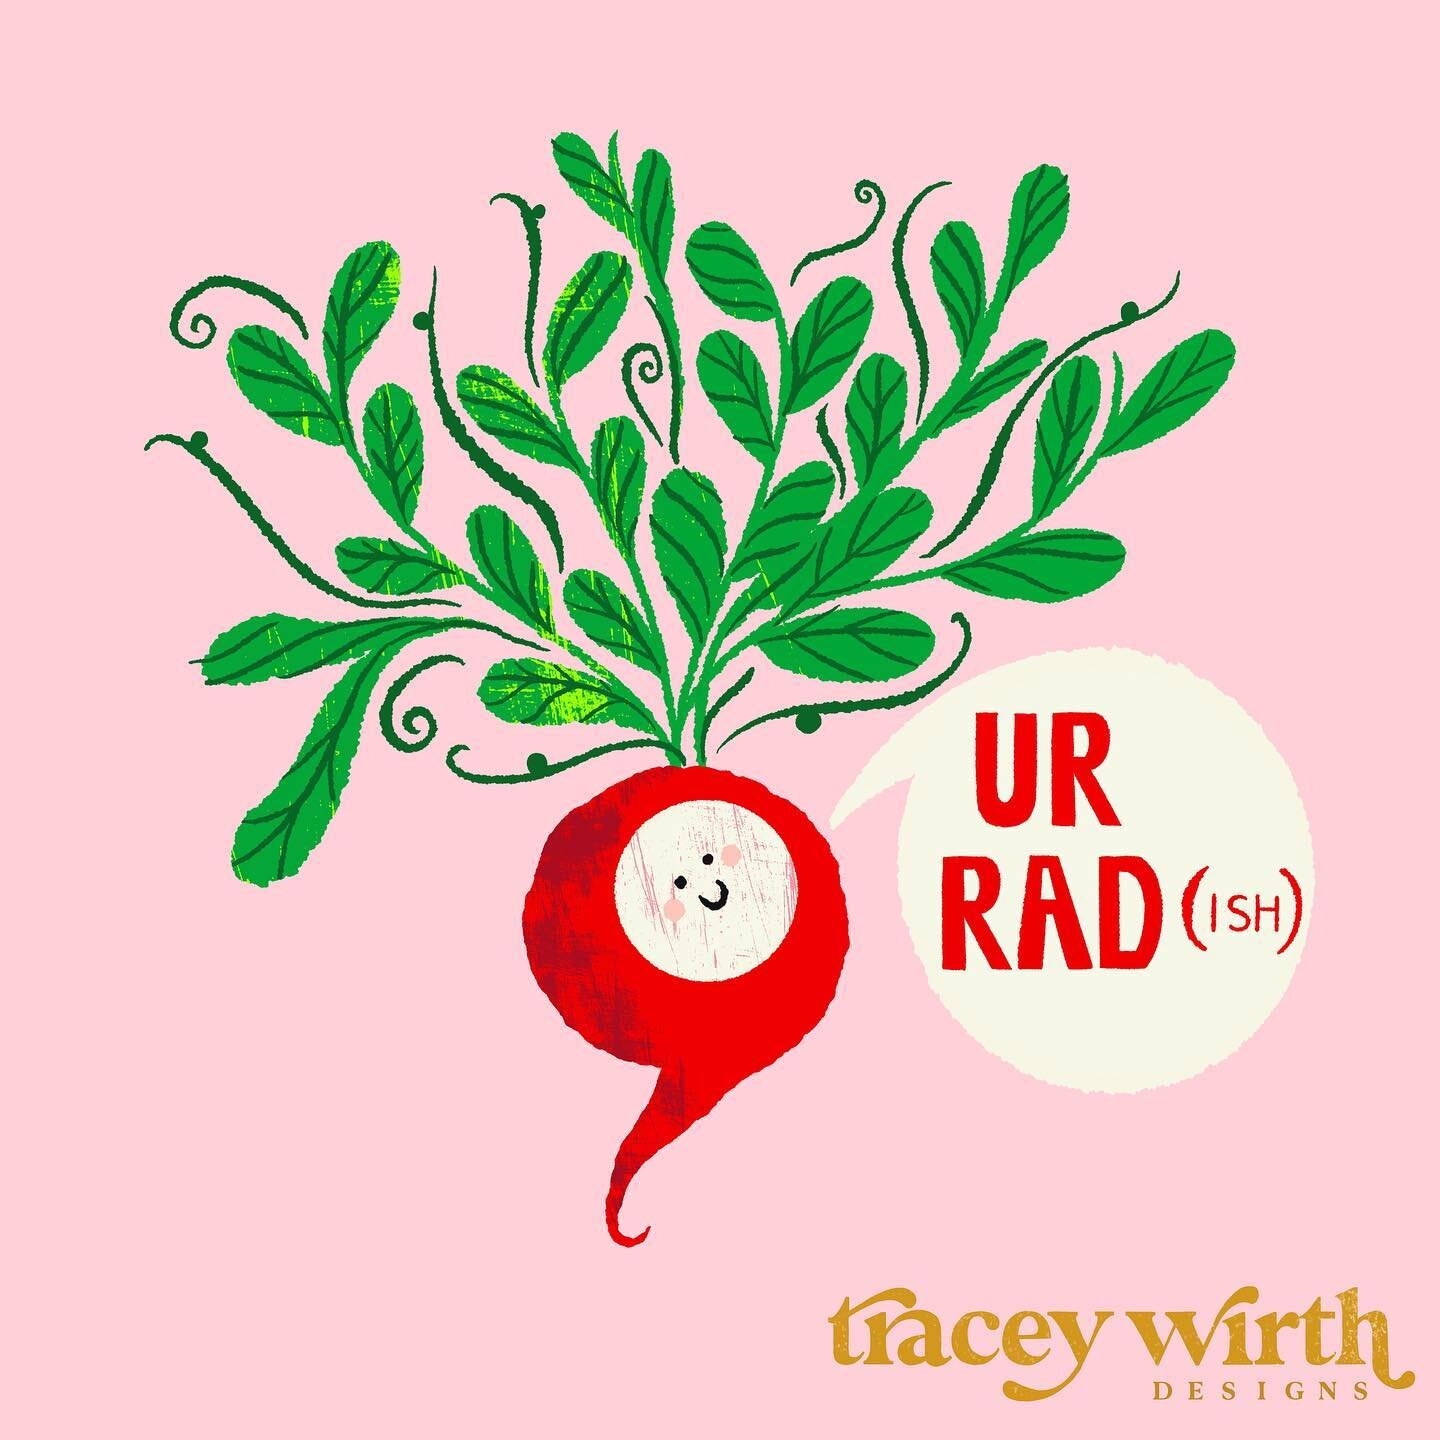 UR RAD-ish.  Do your vegetables talk to you? Well in my world they do, and they say remarkable things to me.  I do love a radish, they bite back though and that&rsquo;s what I love. The crunch and the burn 😍. Lately I find myself illustrating friend